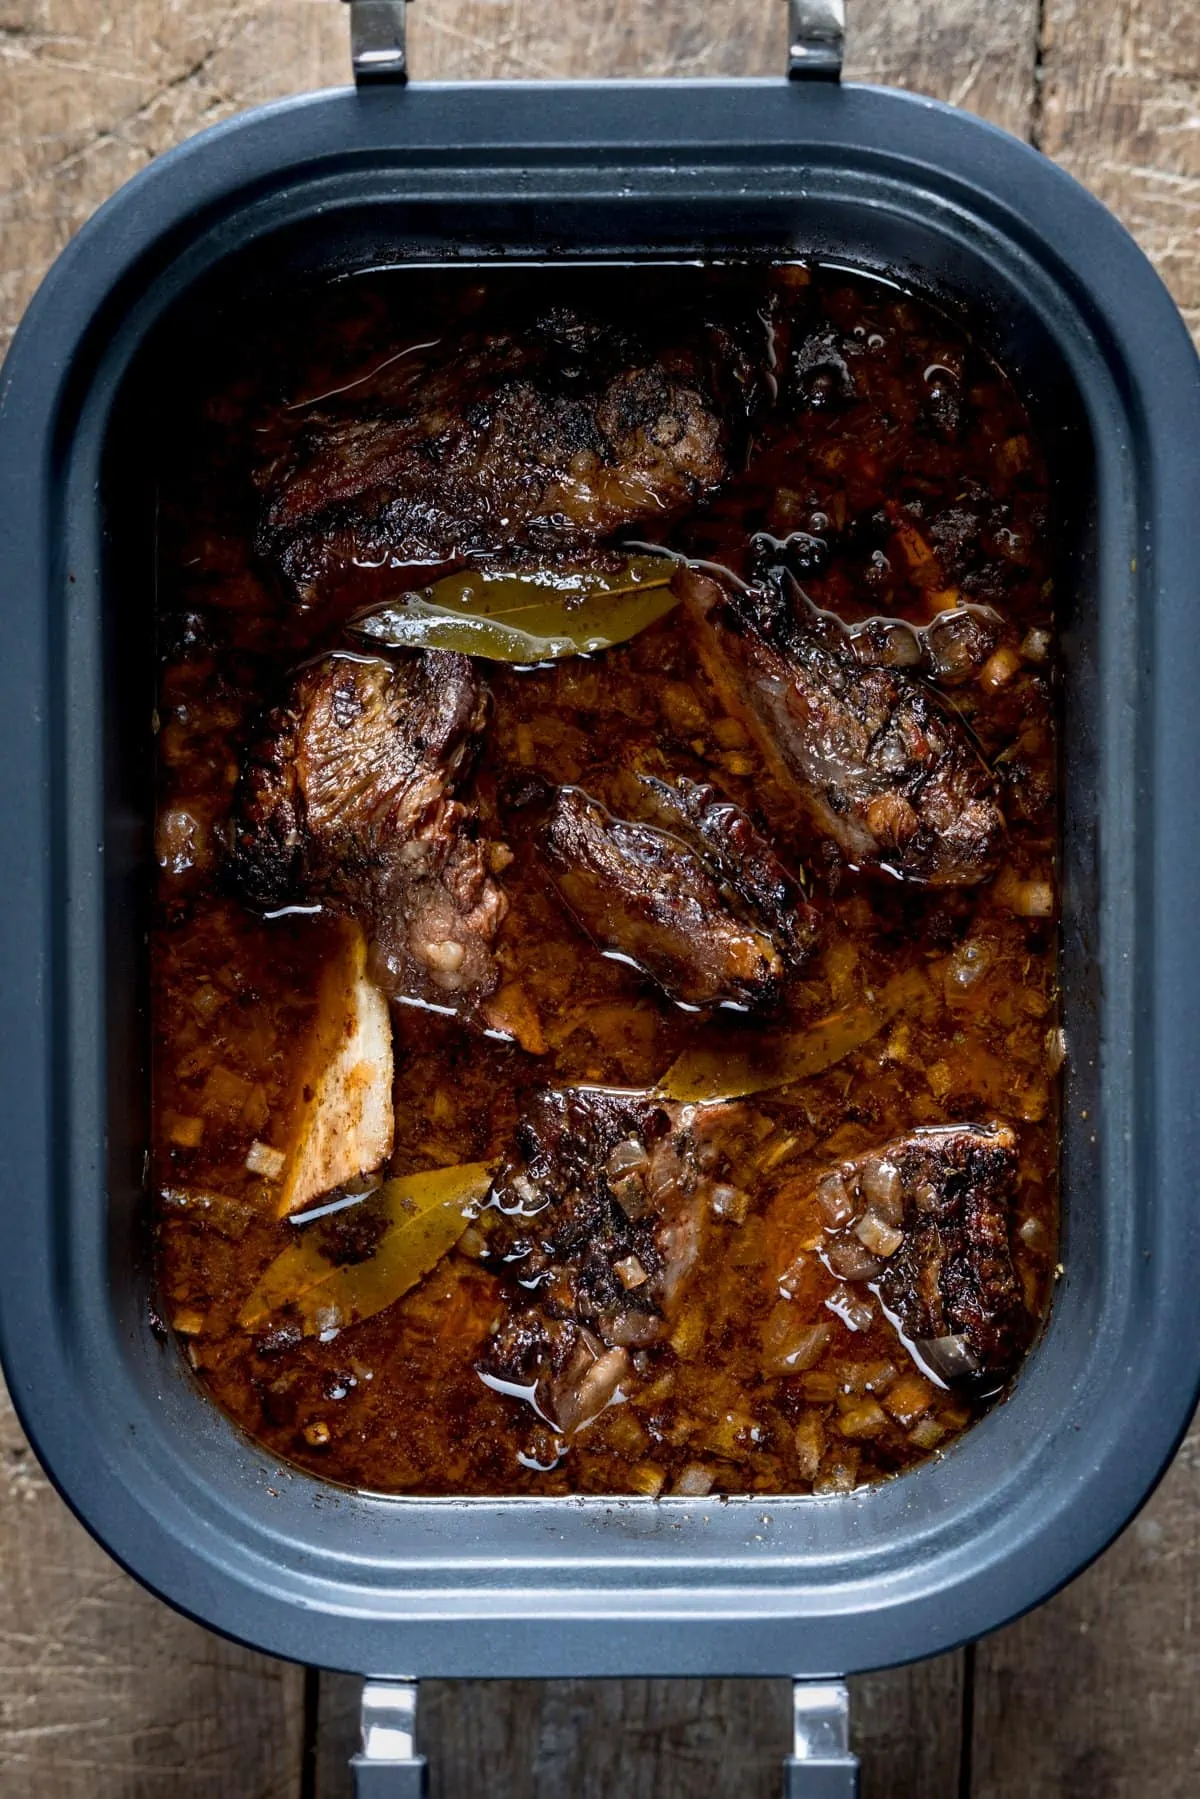 Overhead image of short ribs and gravy being cooked in a slow cooker